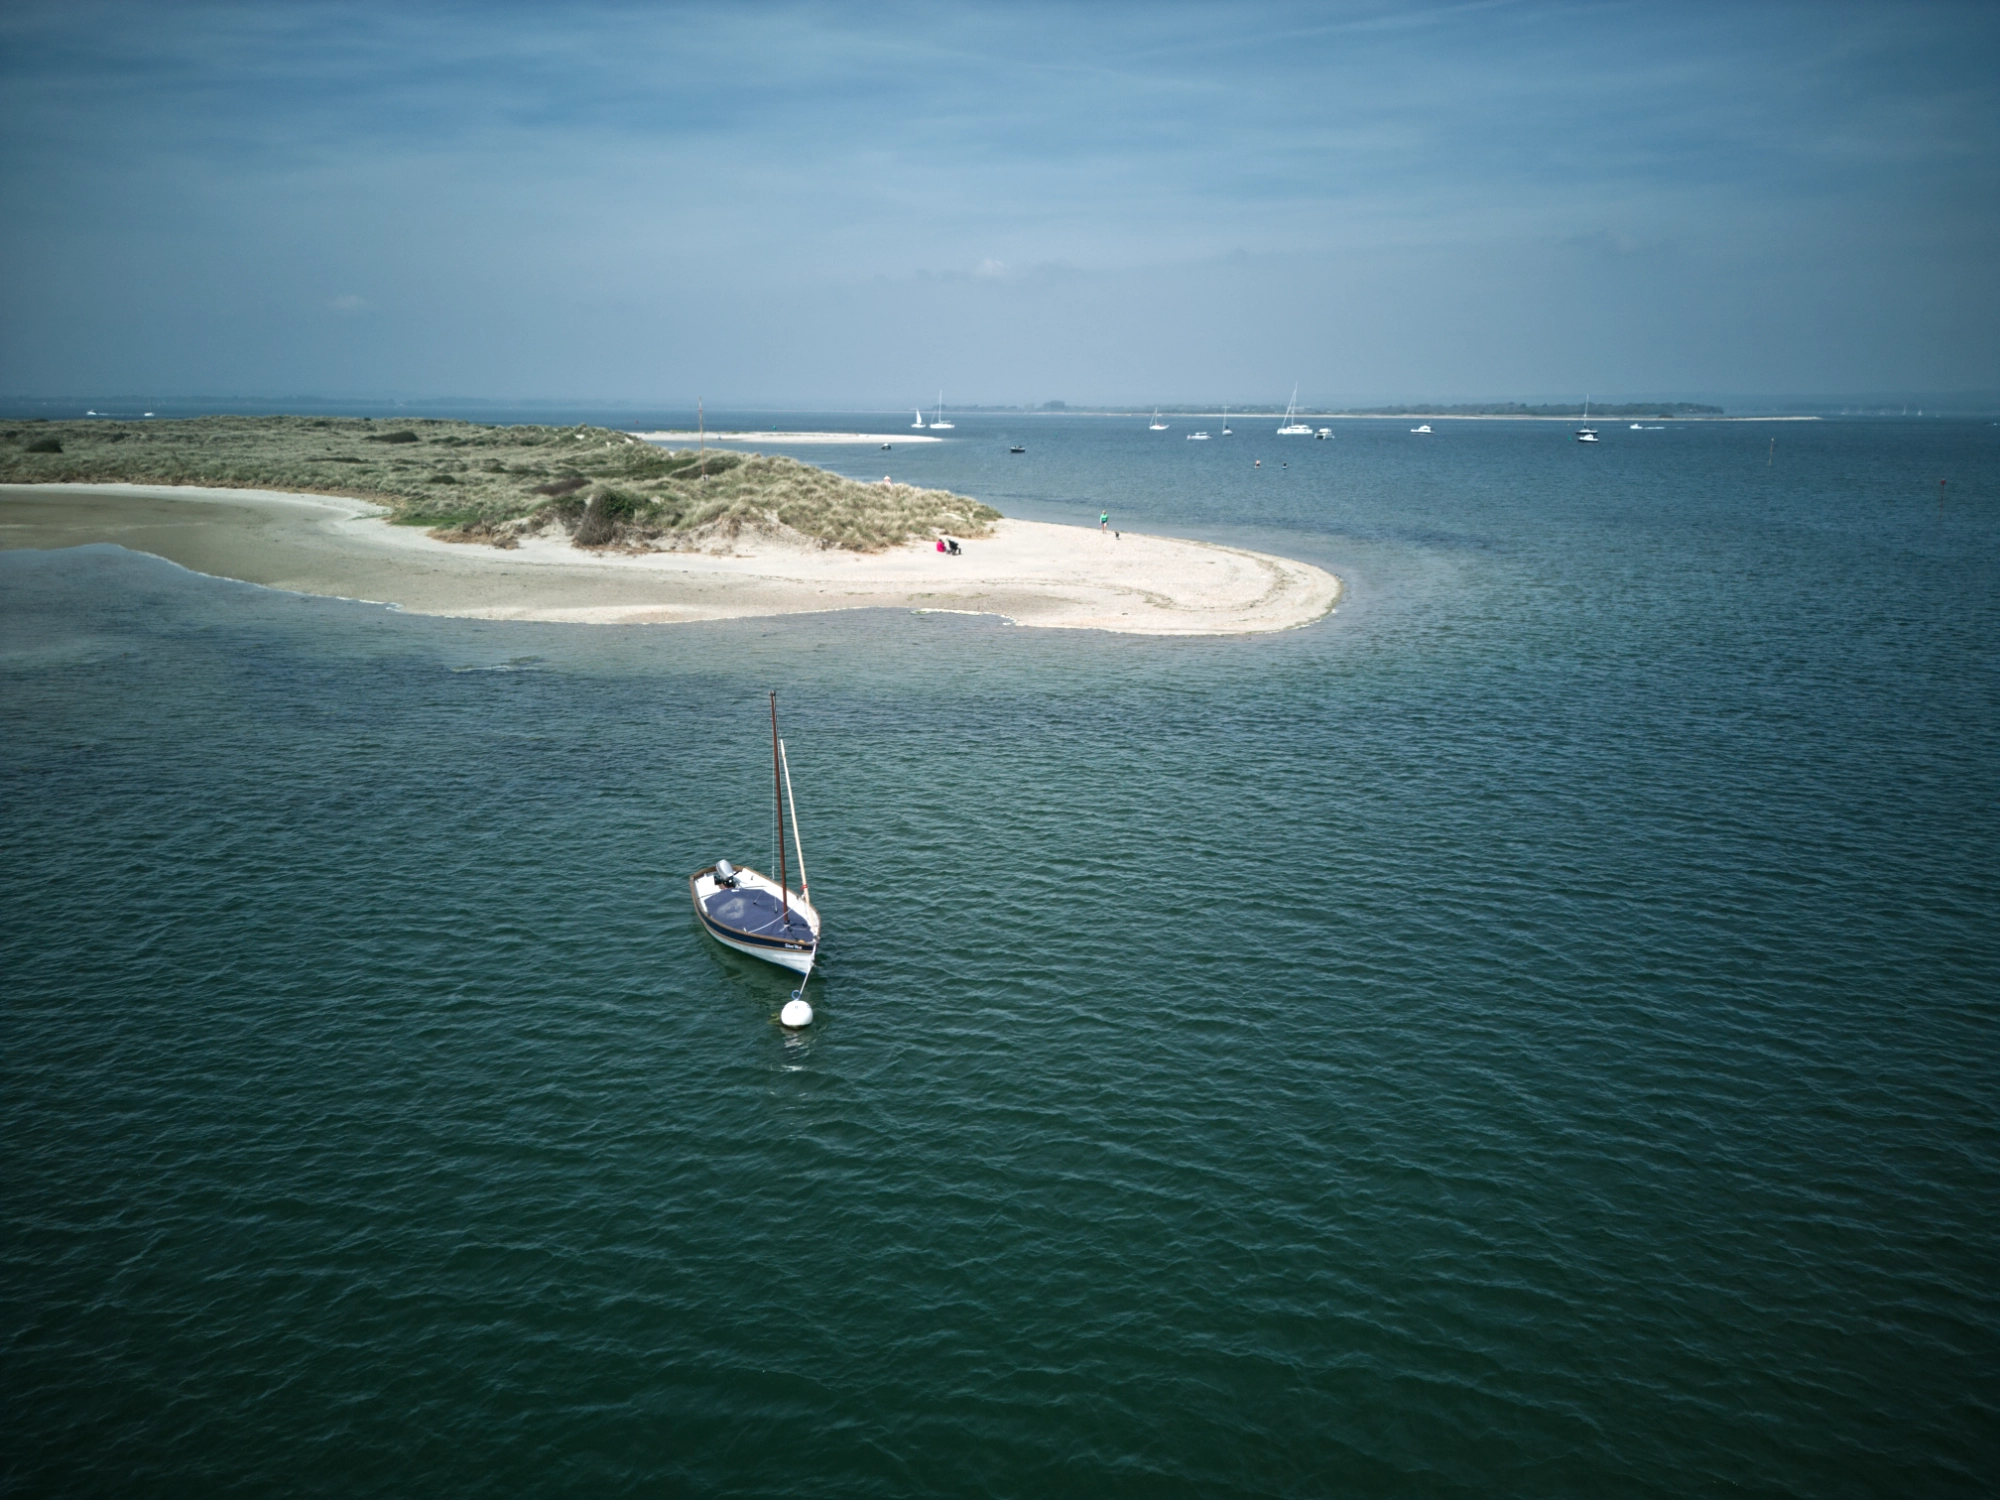 This is Chichester Harbour where we often run our paddleboard tours, windsurfing lessons and foiling sessions